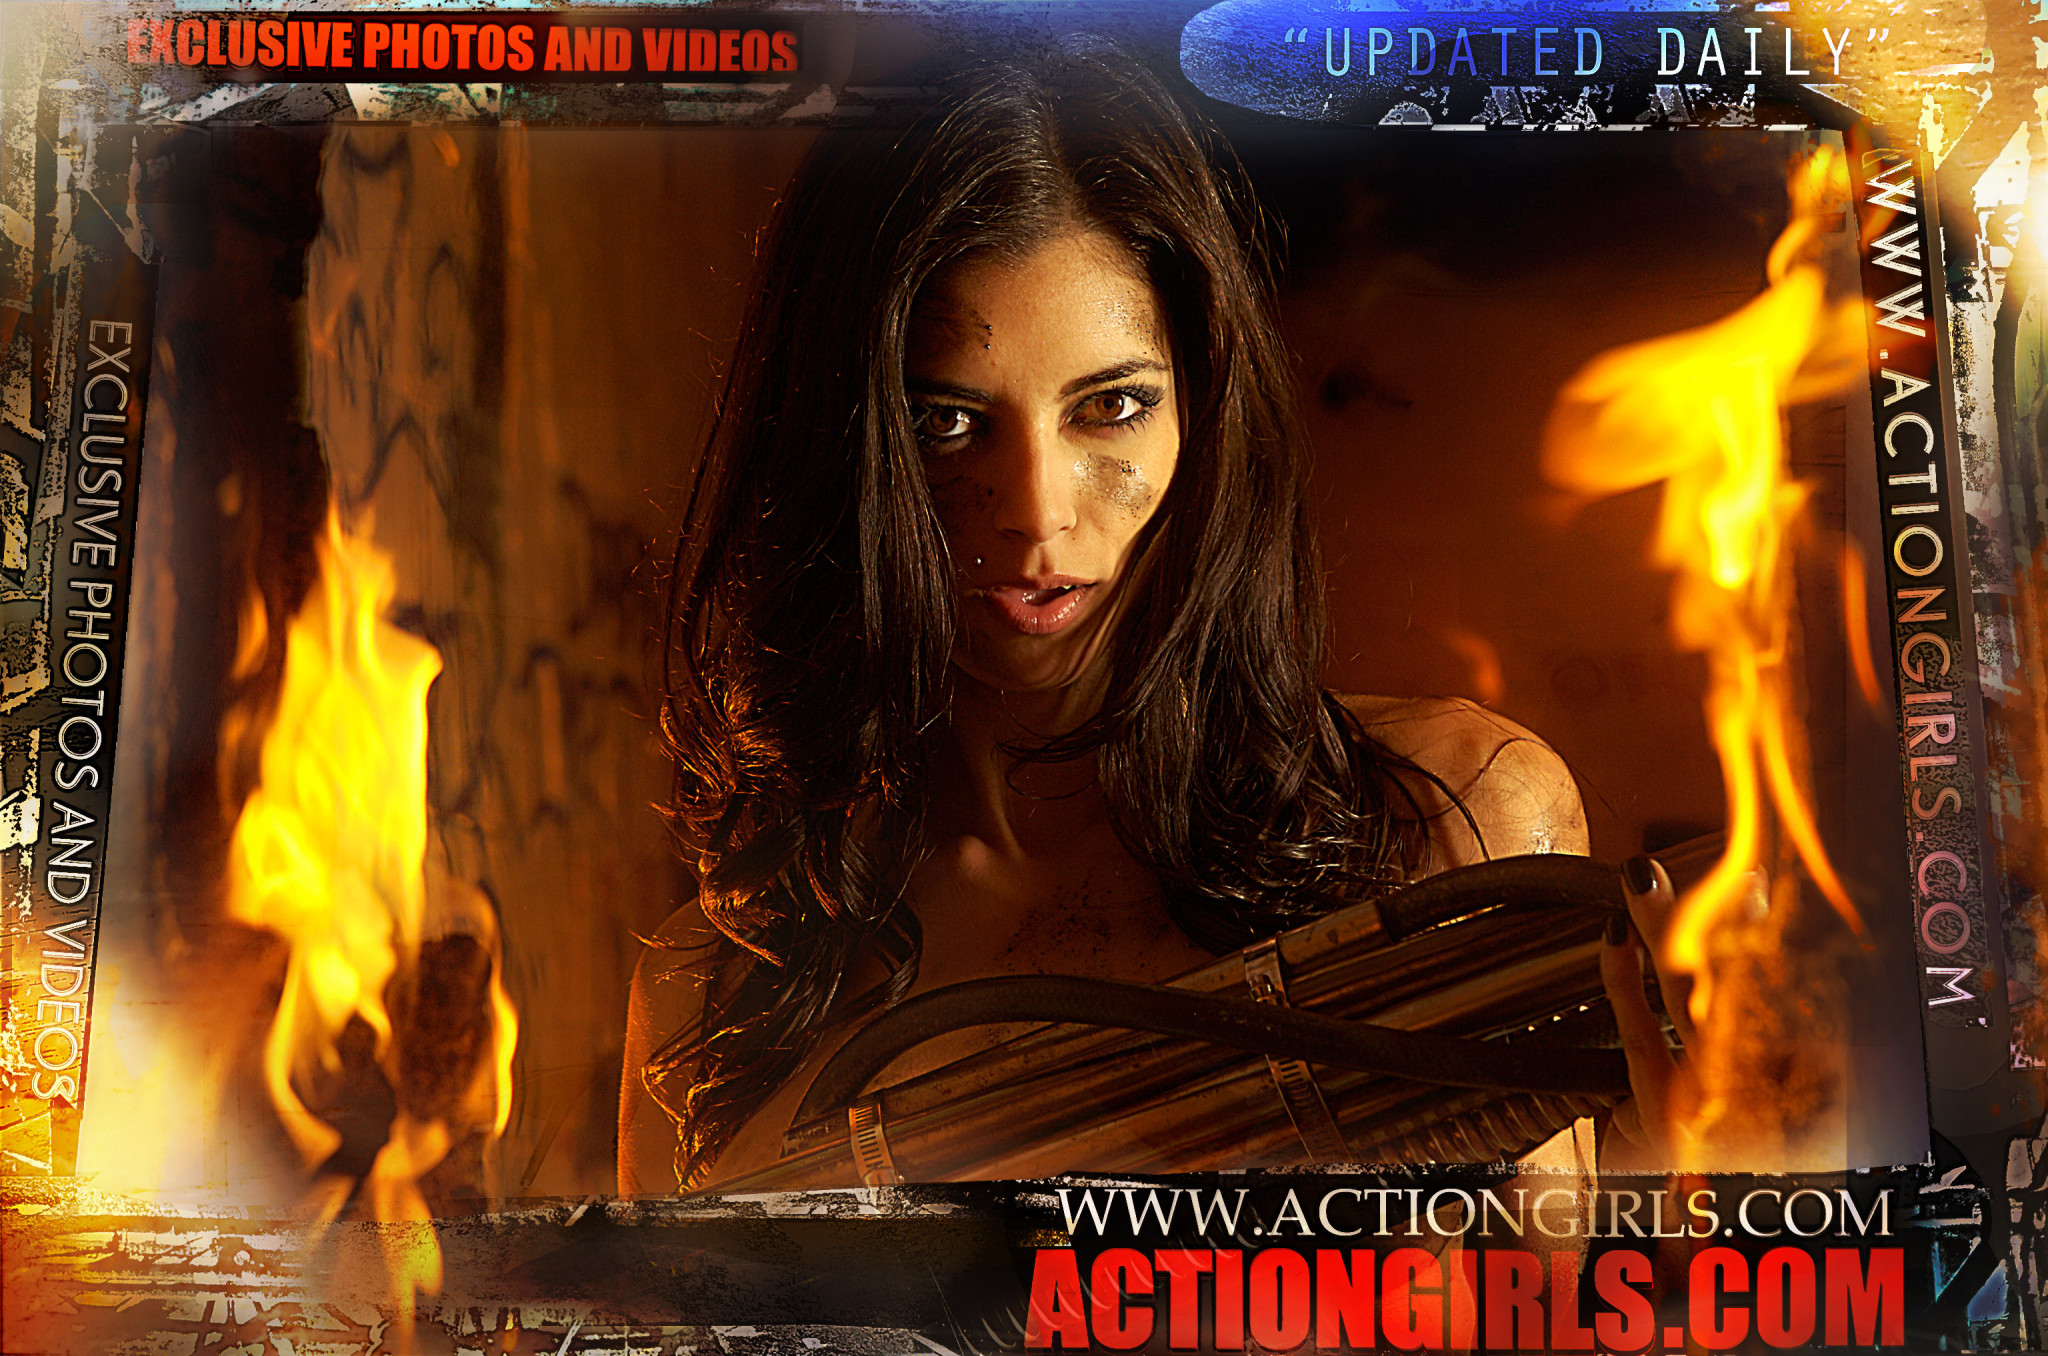 Exklusive actiongirls web-poster deluxe ser 5 fotos actiongirl
 #70962400